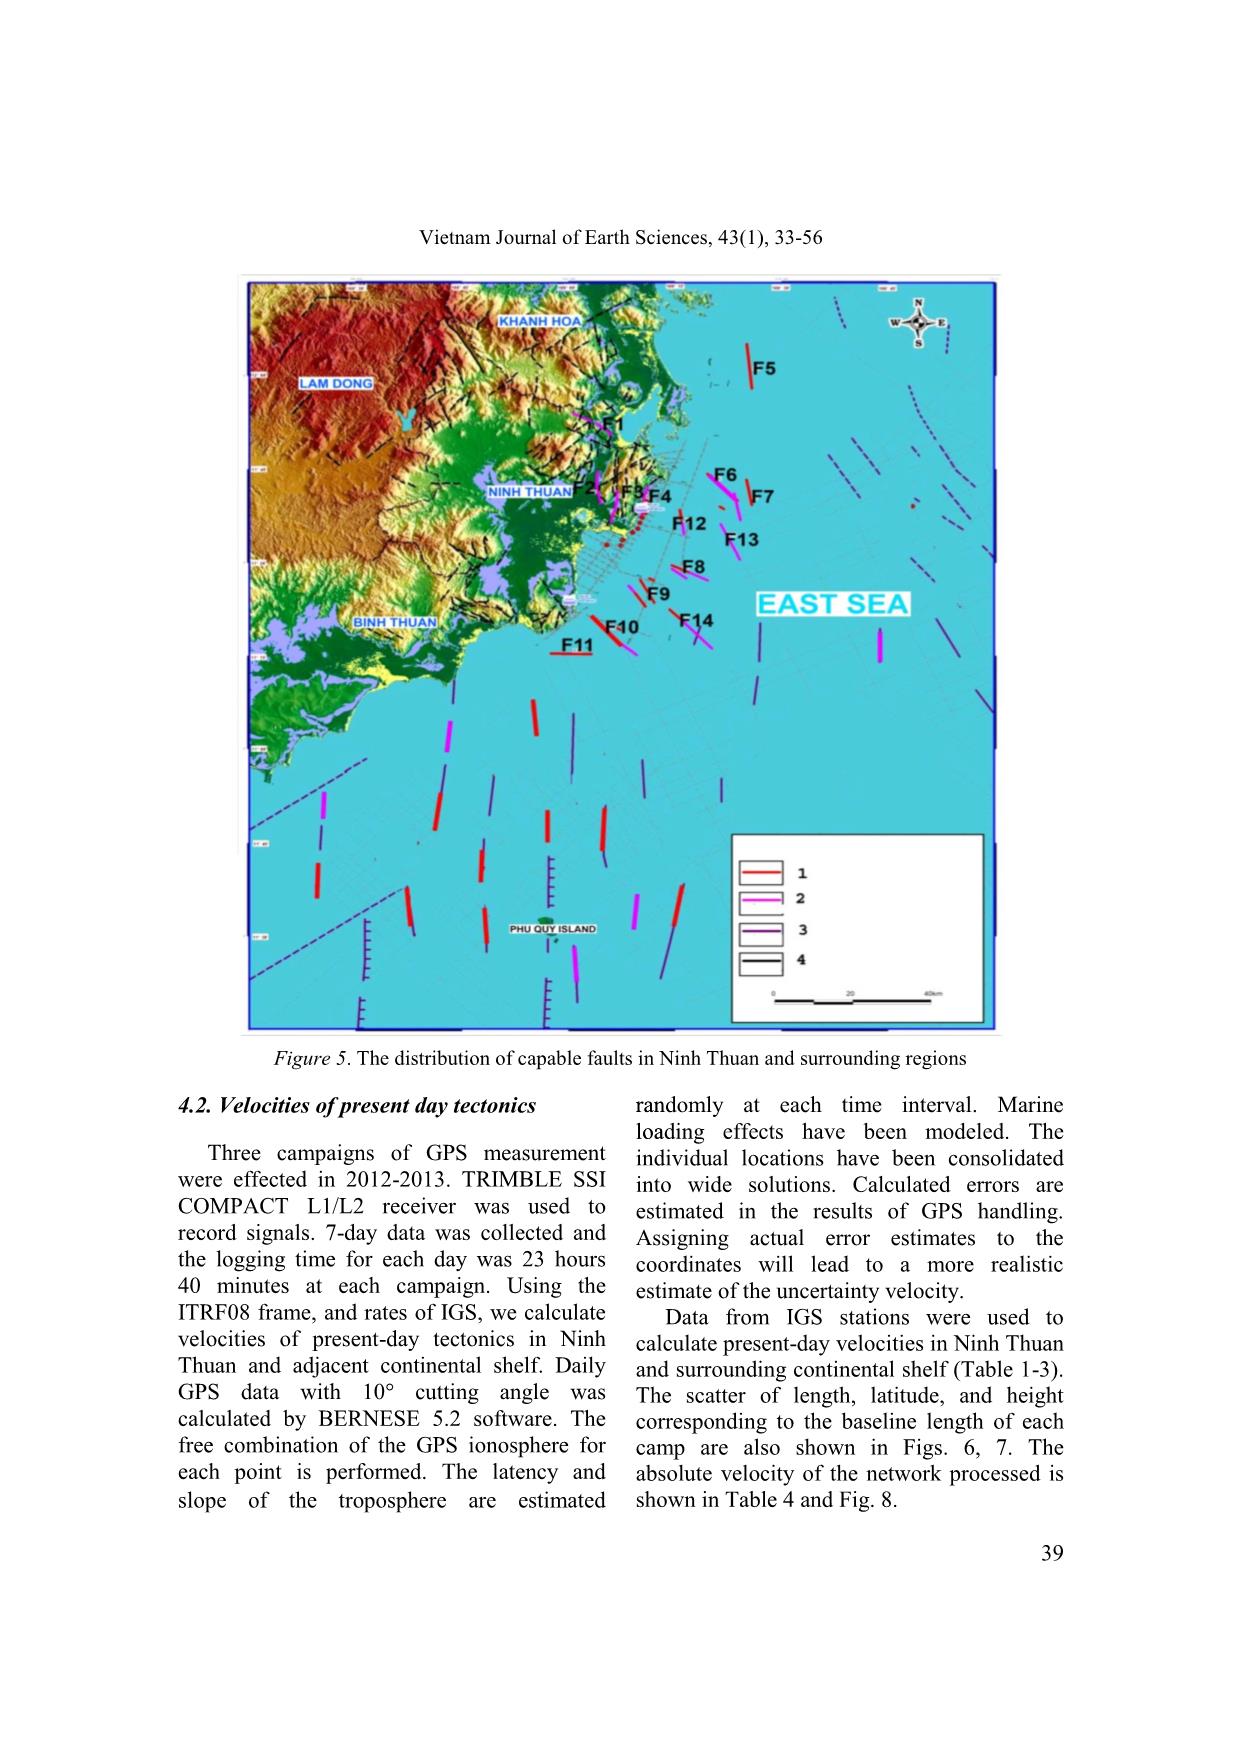 Pliocene - Present tectonics and strain rate in Ninh Thuan region and surrounding continental shelf trang 7